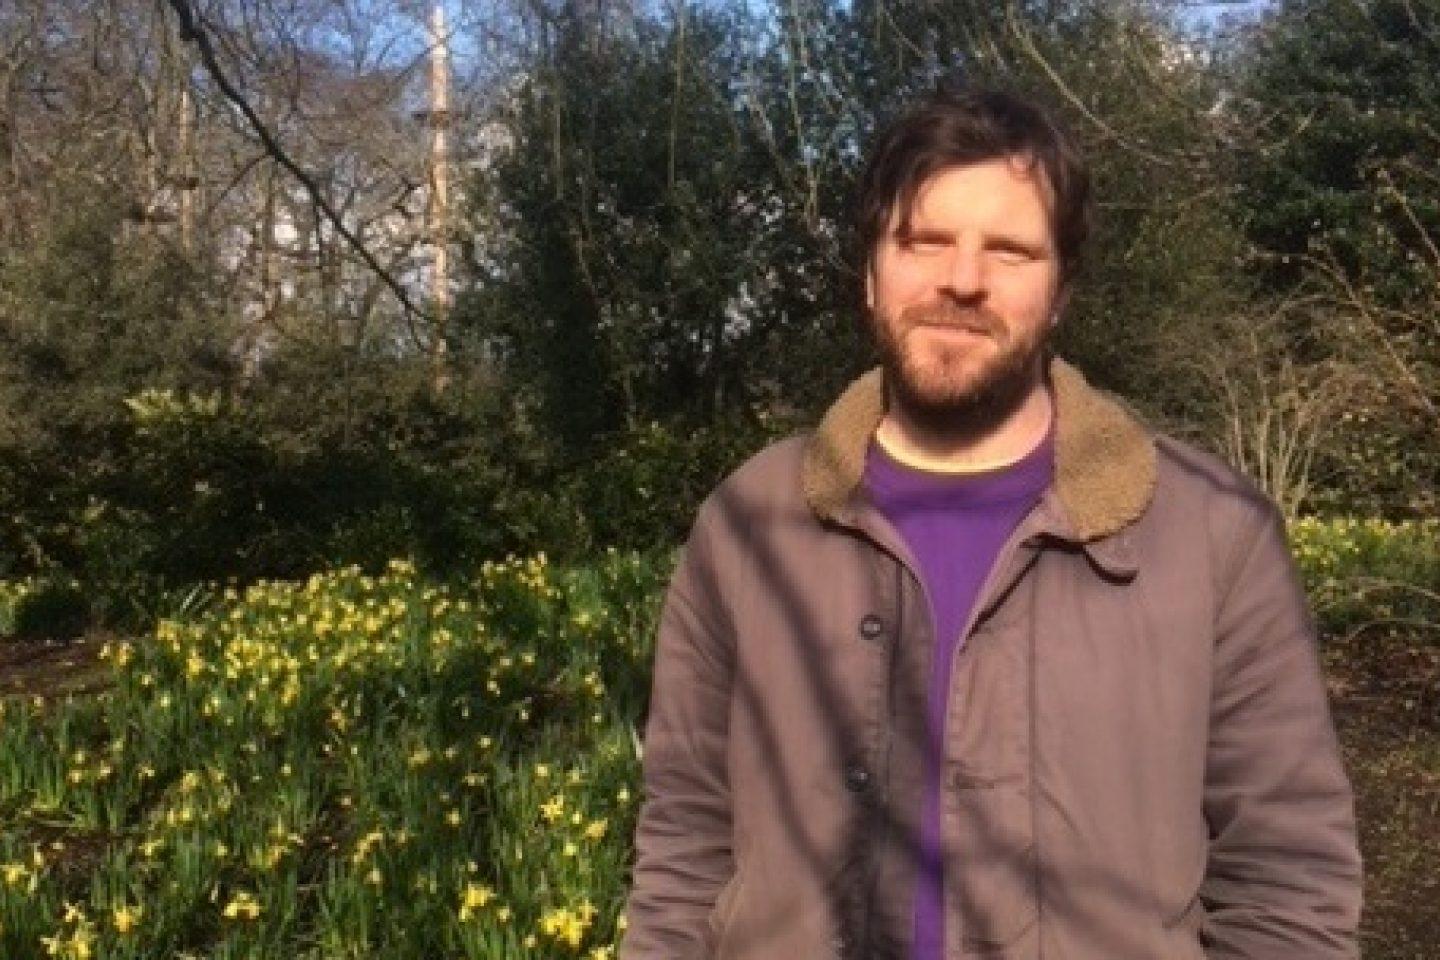 Mark Emery against a background of yellow daffodils